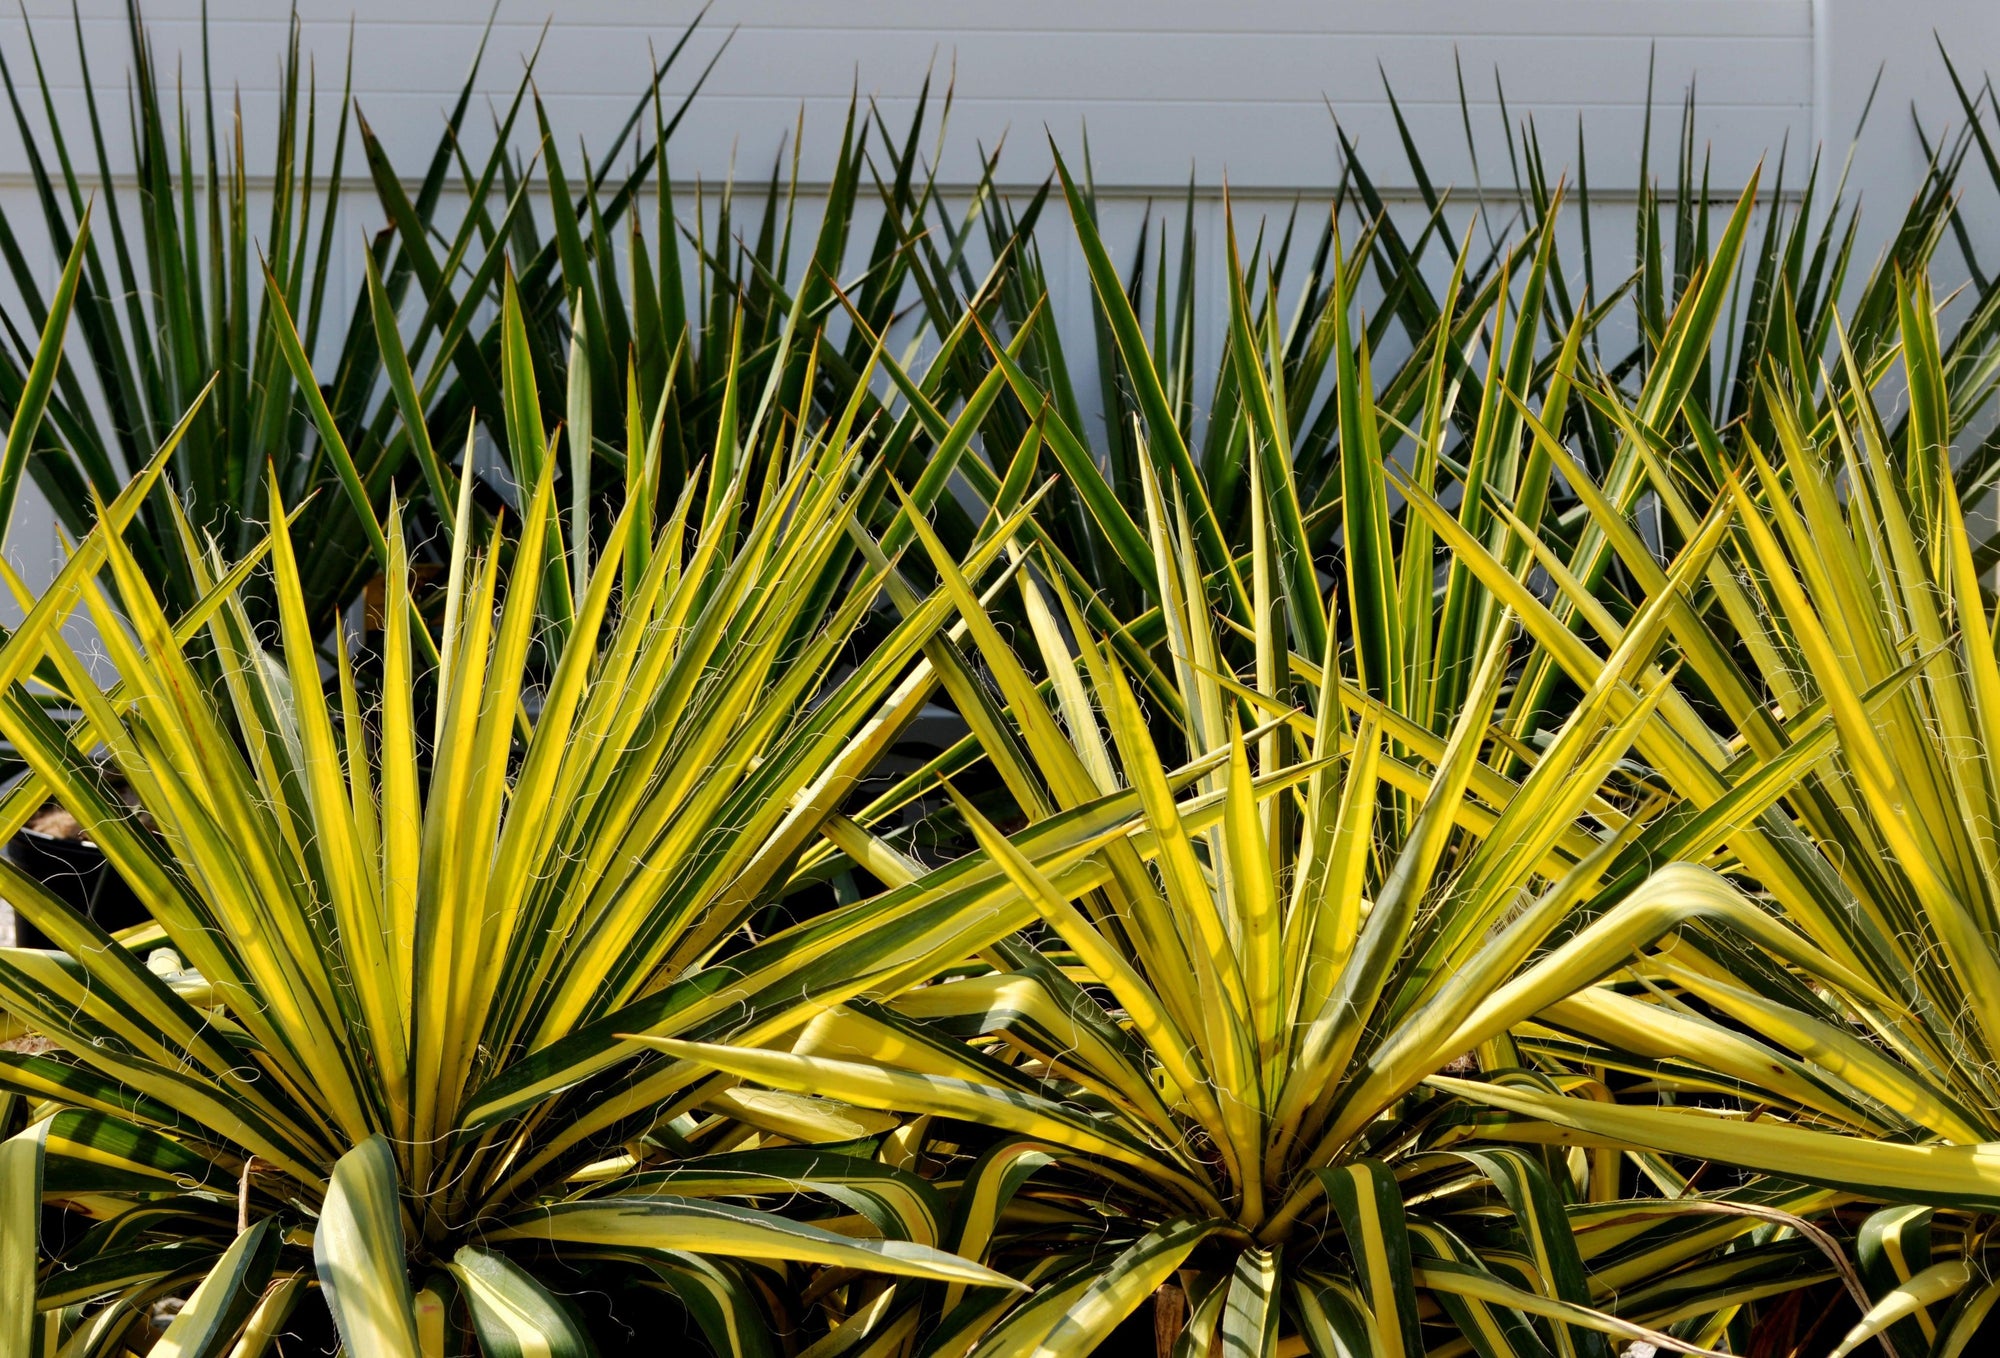 This impressive yucca variety, also known as Yucca filamentosa 'Golden Sword,' features long, sword-shaped leaves with a vibrant golden-yellow color, creating a bold contrast against its surroundings. The sturdy, architectural form of the Golden Sword Yucca makes it a standout focal point in garden beds, borders, or even containers. As a hardy evergreen perennial, it maintains its stunning appearance throughout the year, adding a splash of color even in the colder months.